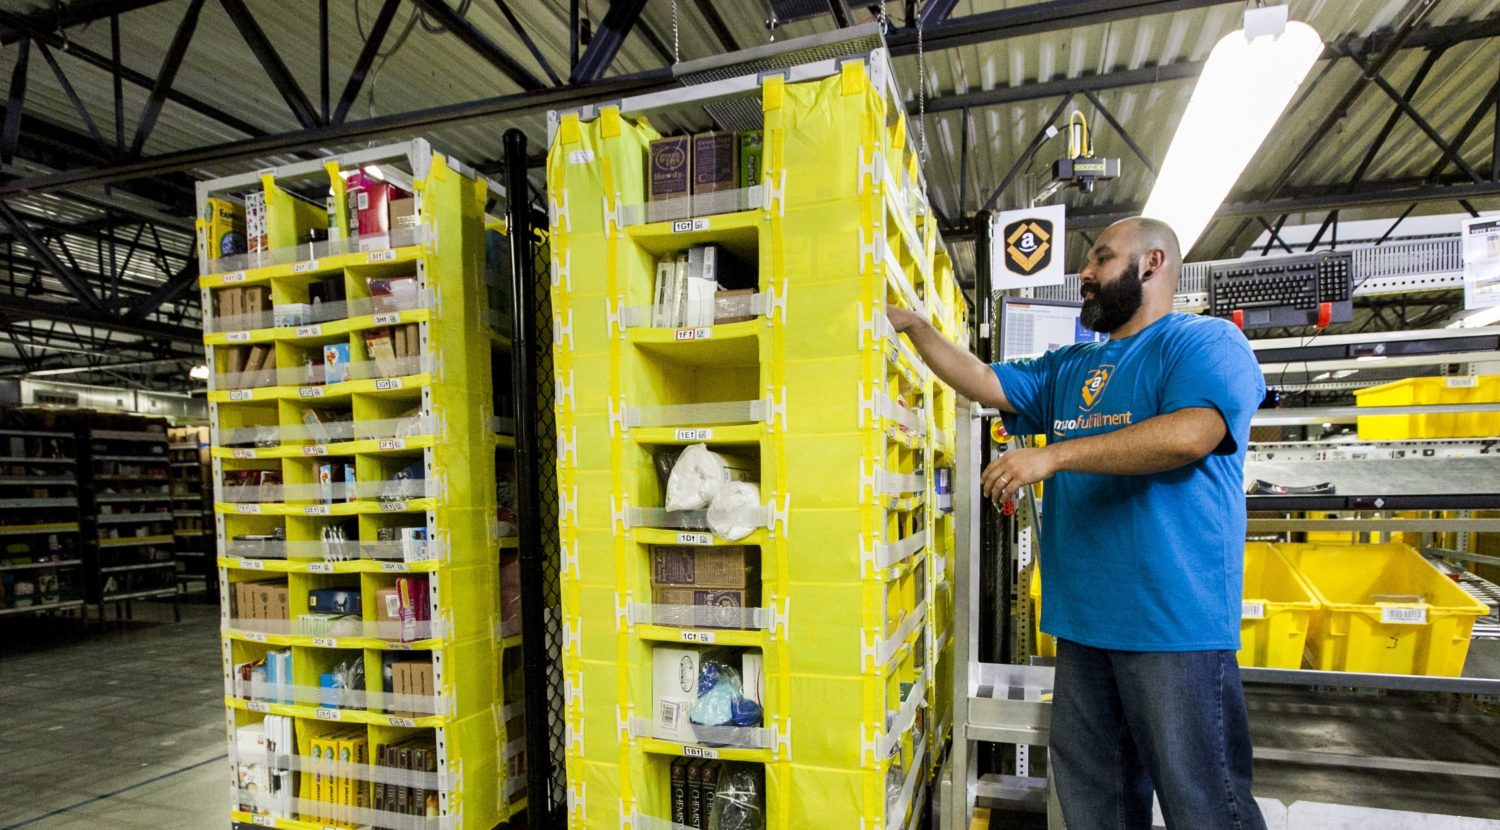 Amazon announces that it will increase fulfillment center workers' wages to $15 per hour beginning November 1, after New Food Economy reporting about its workers' reliance on food stamps and Bernie Sanders' bill to tax companies for corporate welfare. Credit: Amazon, October 2018